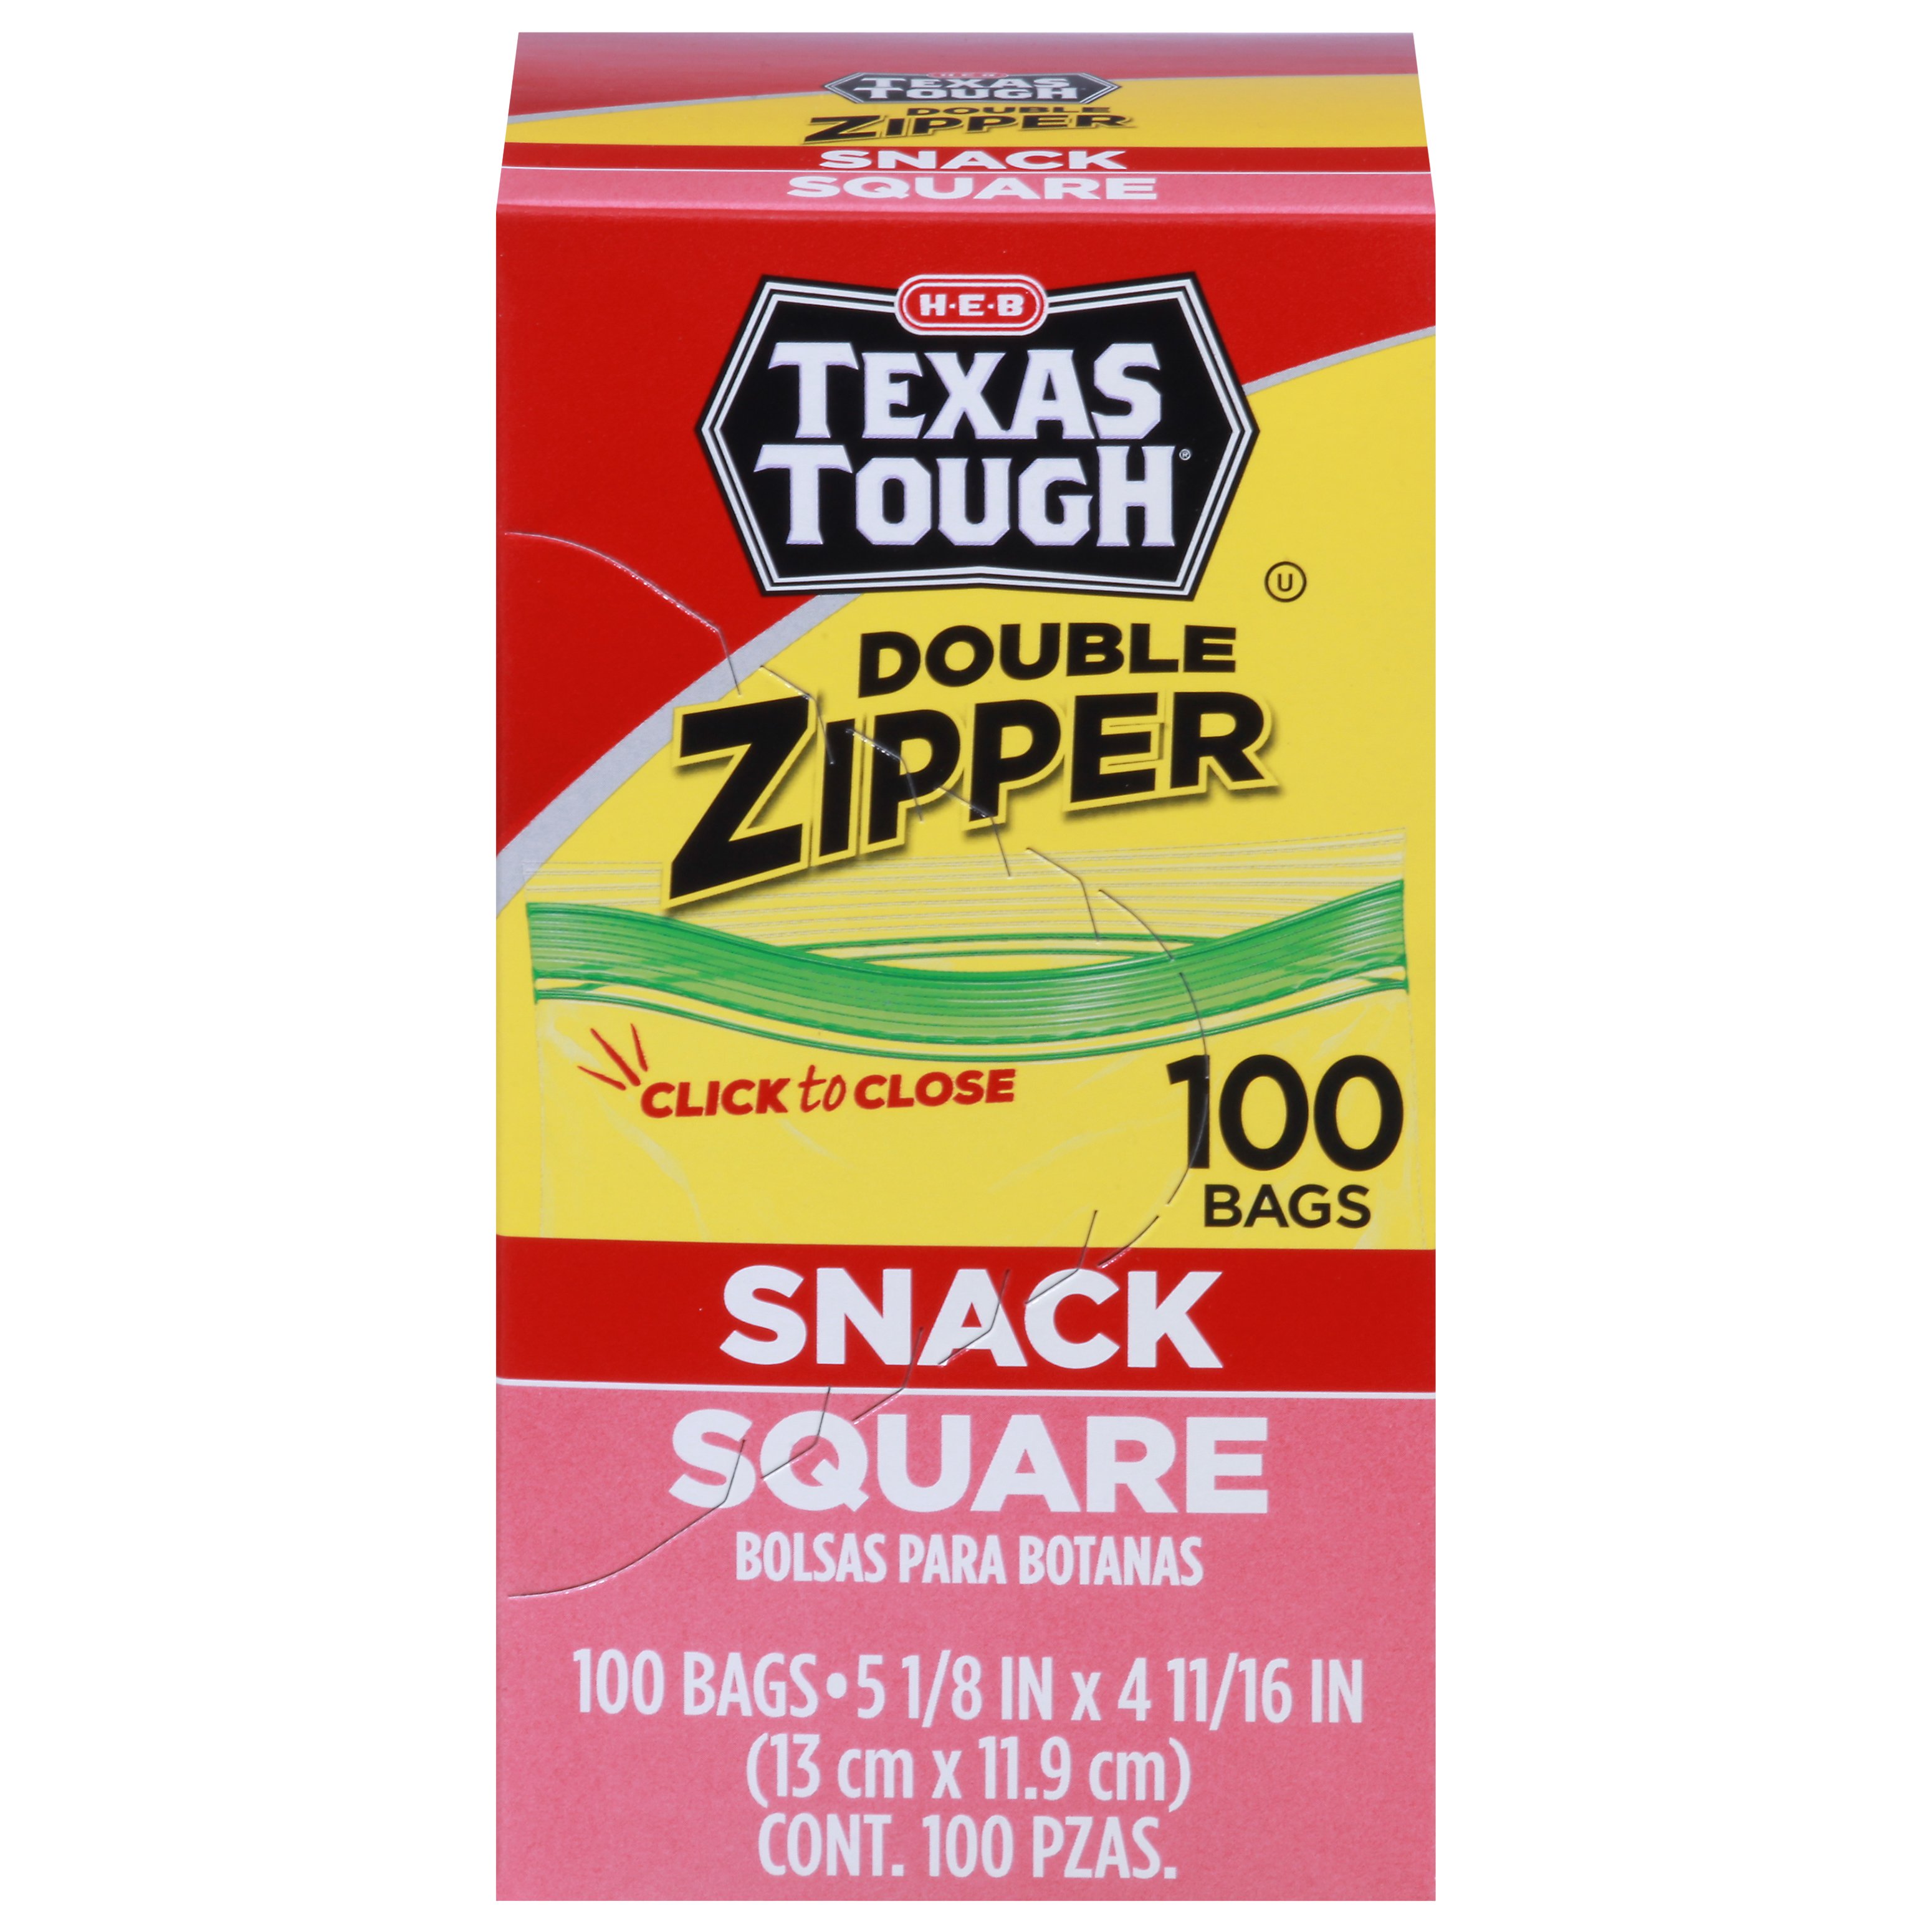 99 Confortable Heb ziploc bags for Everyday